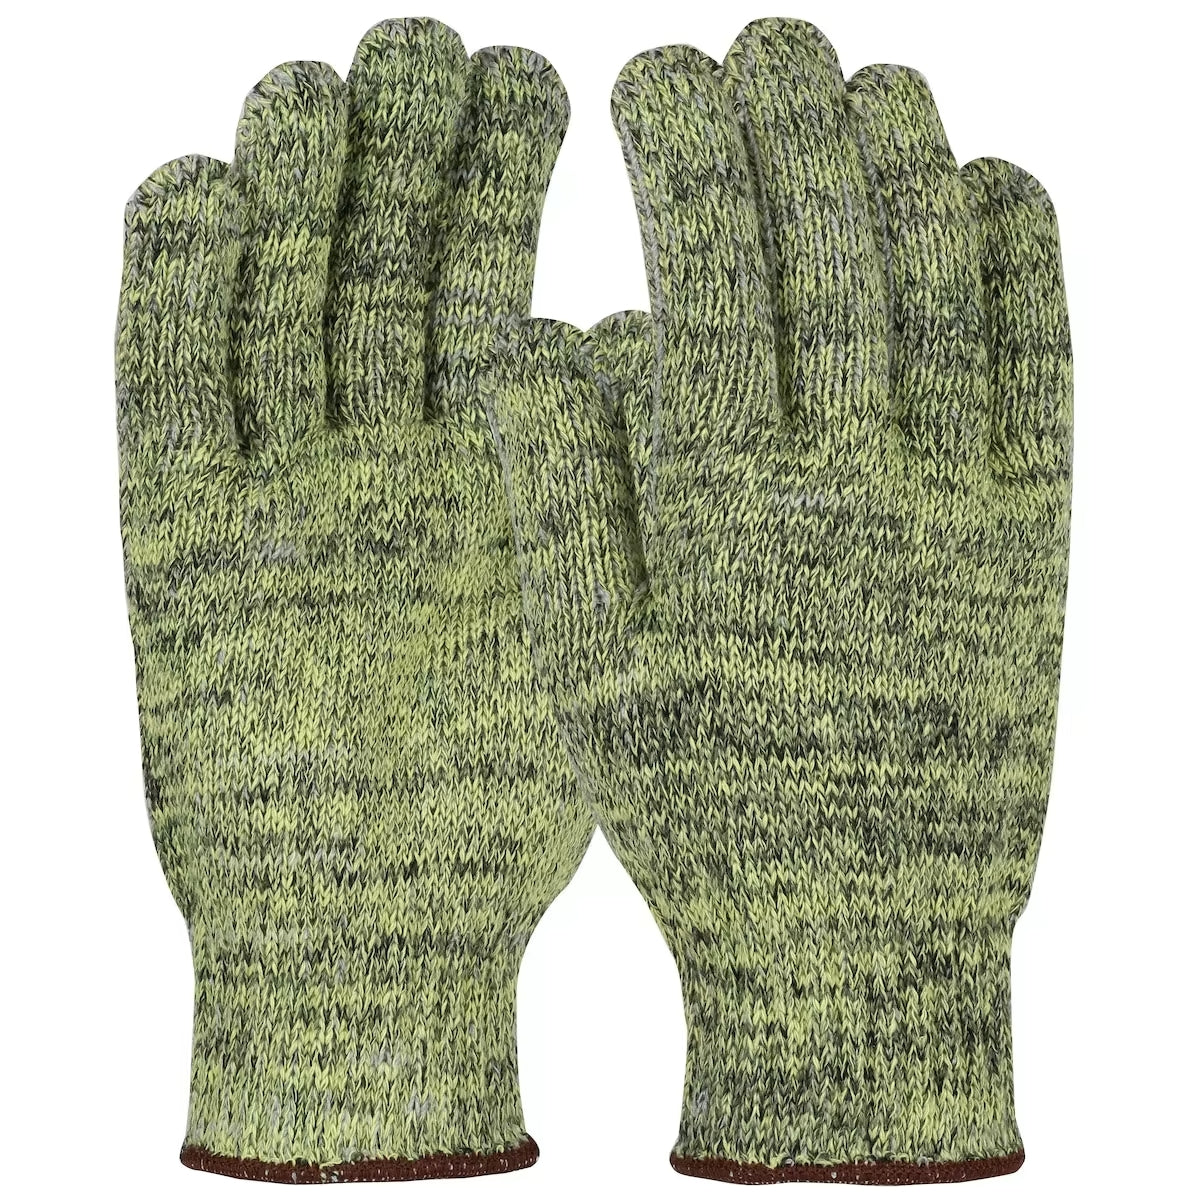 Pair of Cut Resistant Ambidextrous Gloves that are safe for people with visually impairments and blind. 